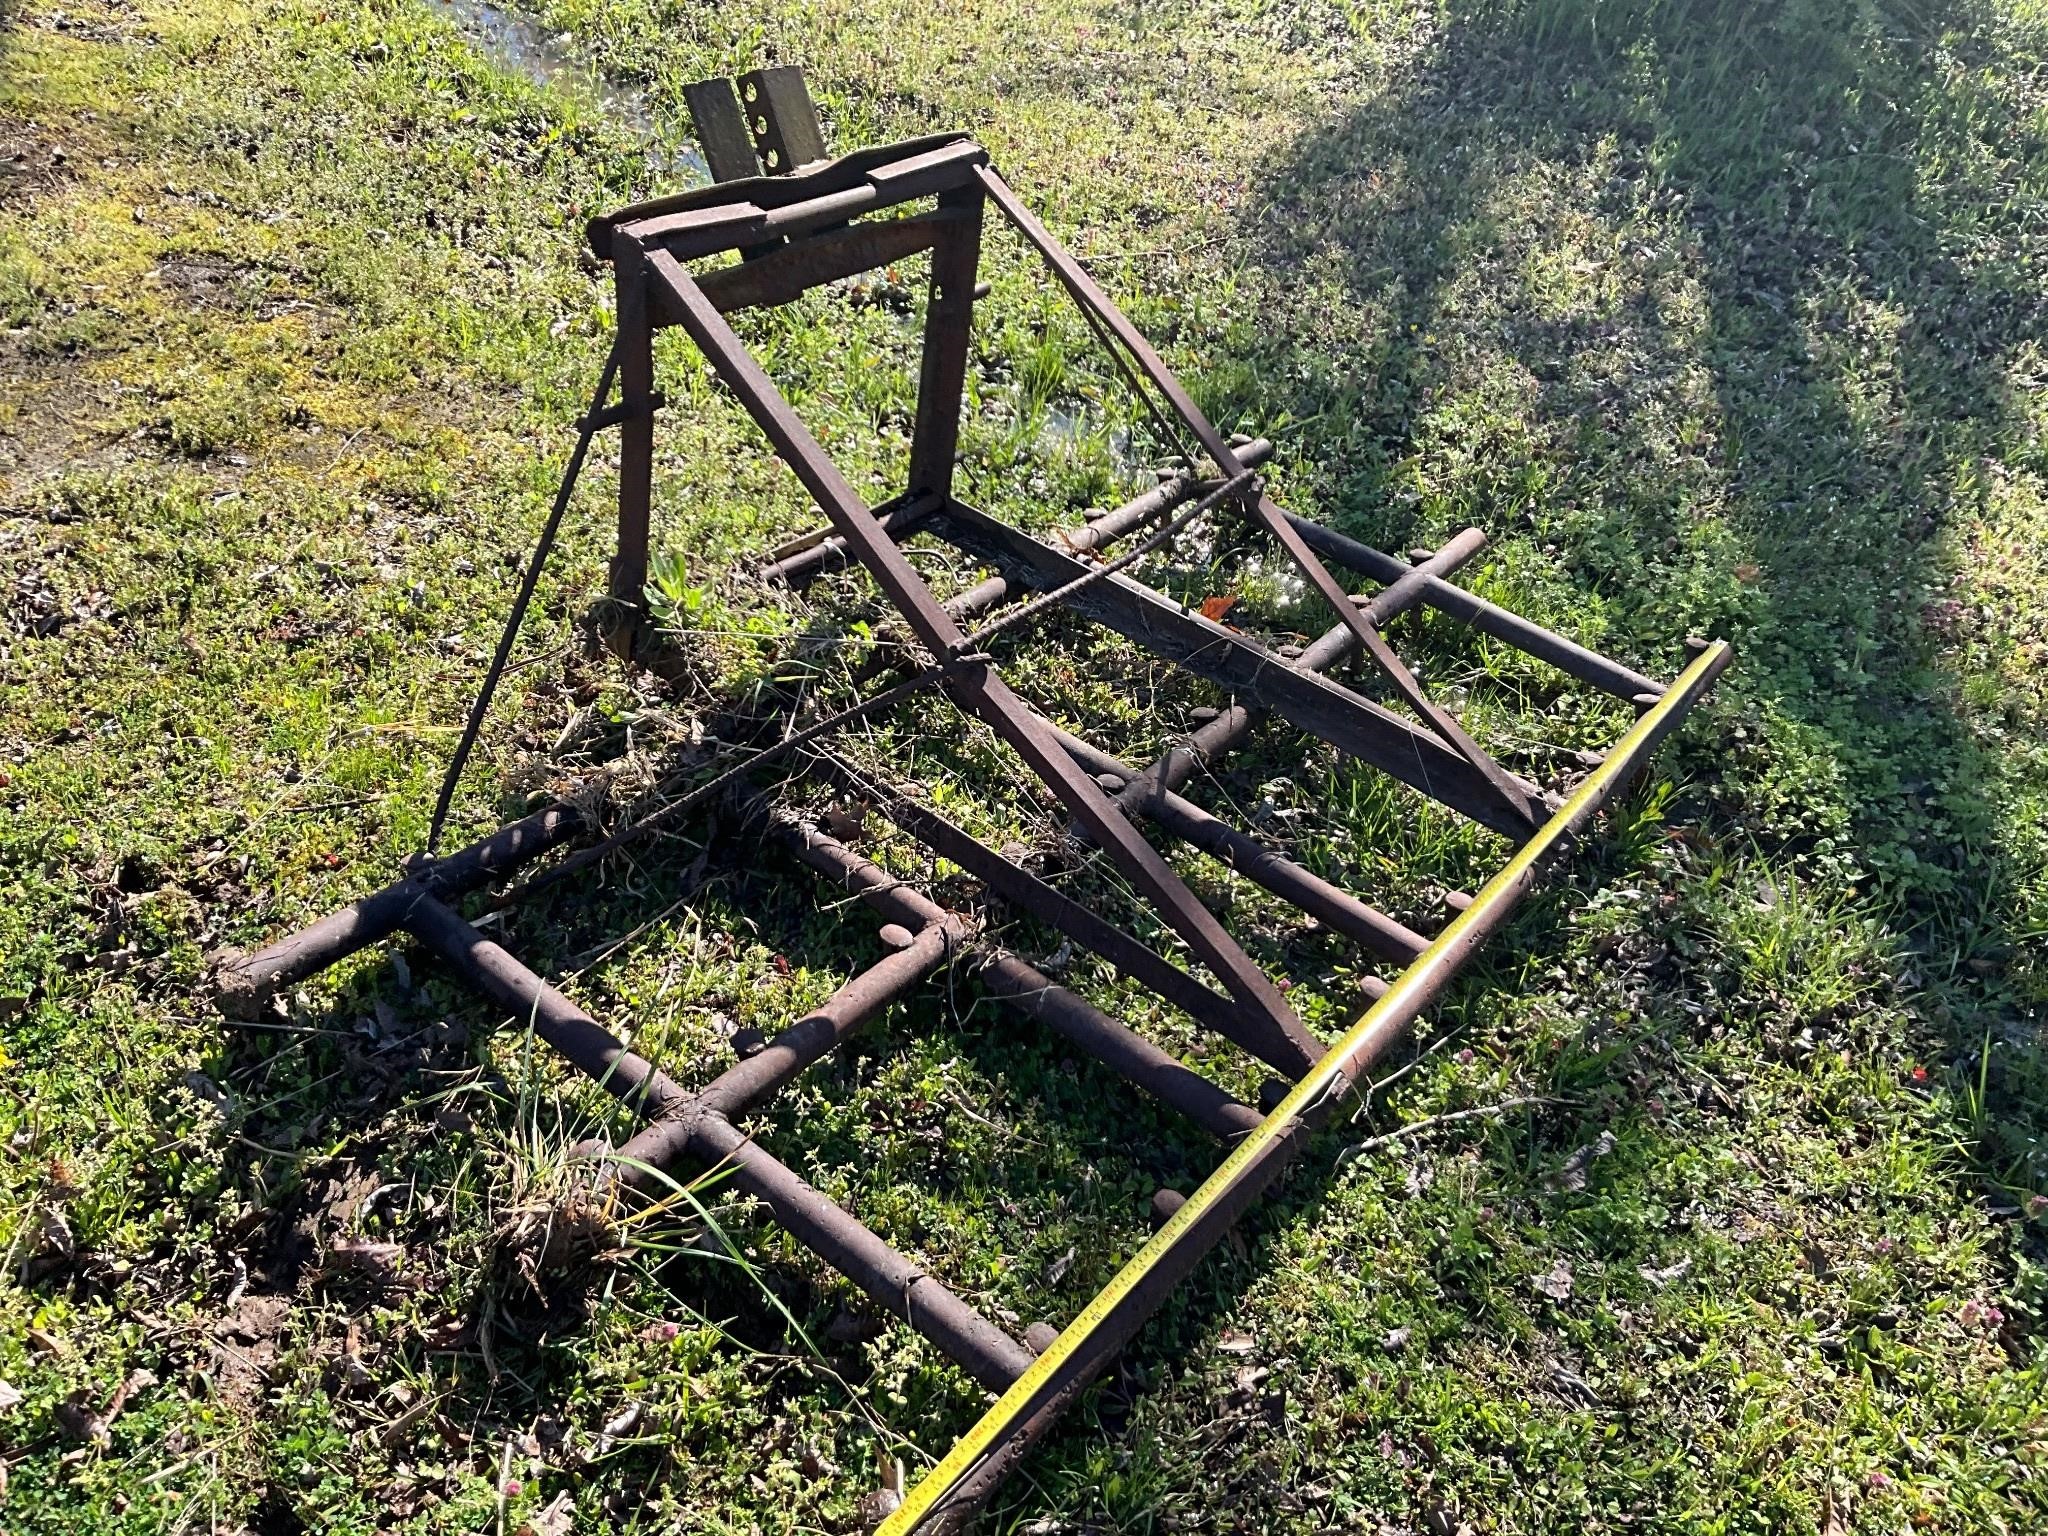 Home made harrow with railroad spikes